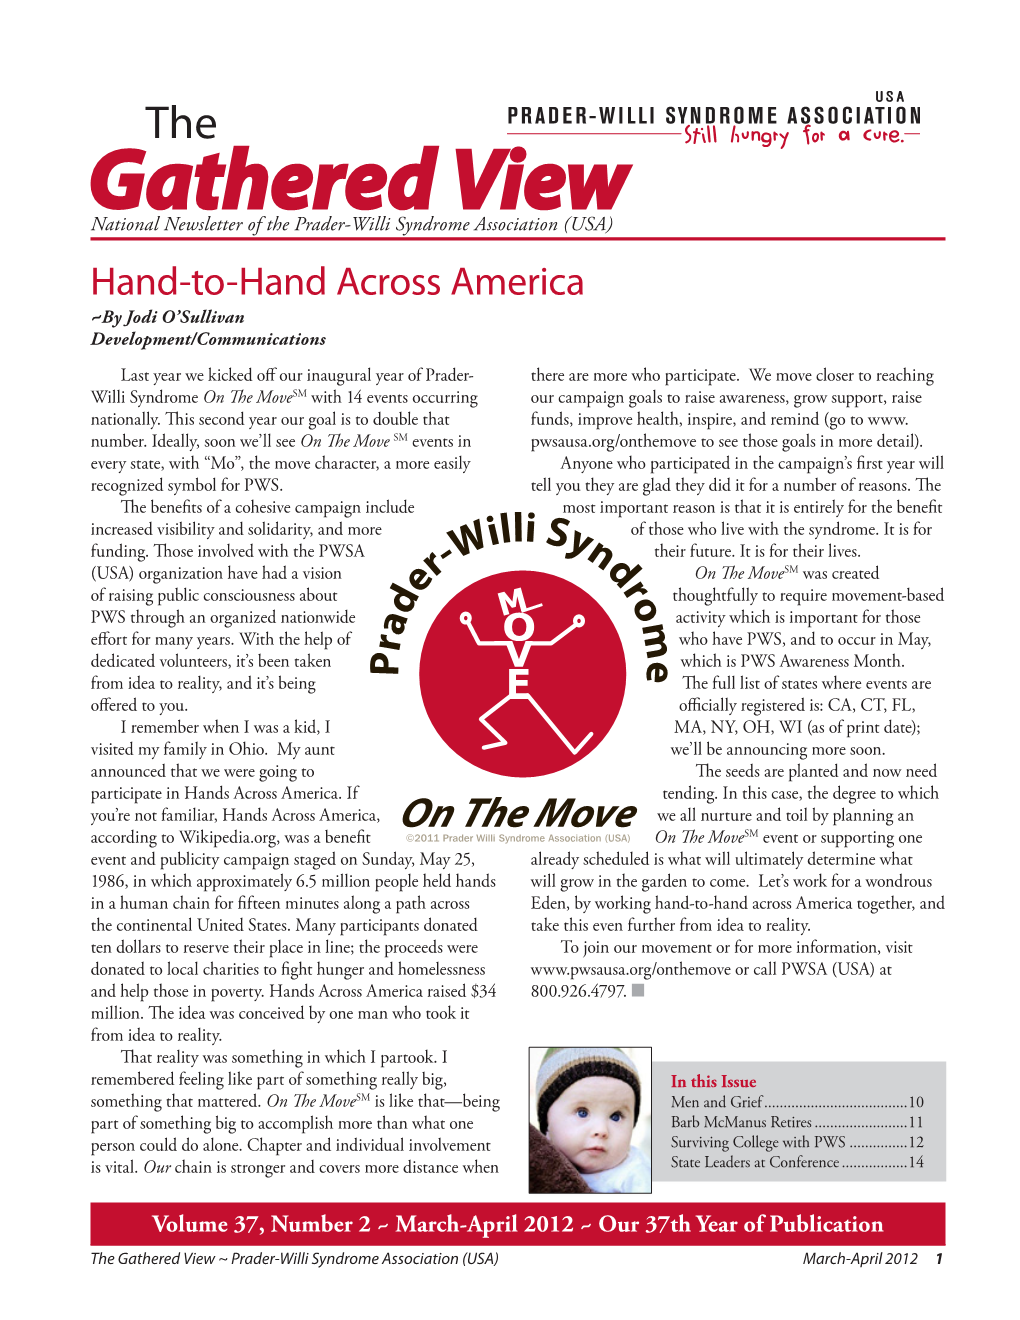 Gathered View National Newsletter of the Prader-Willi Syndrome Association (USA) Hand-To-Hand Across America ~By Jodi O’Sullivan Development/Communications